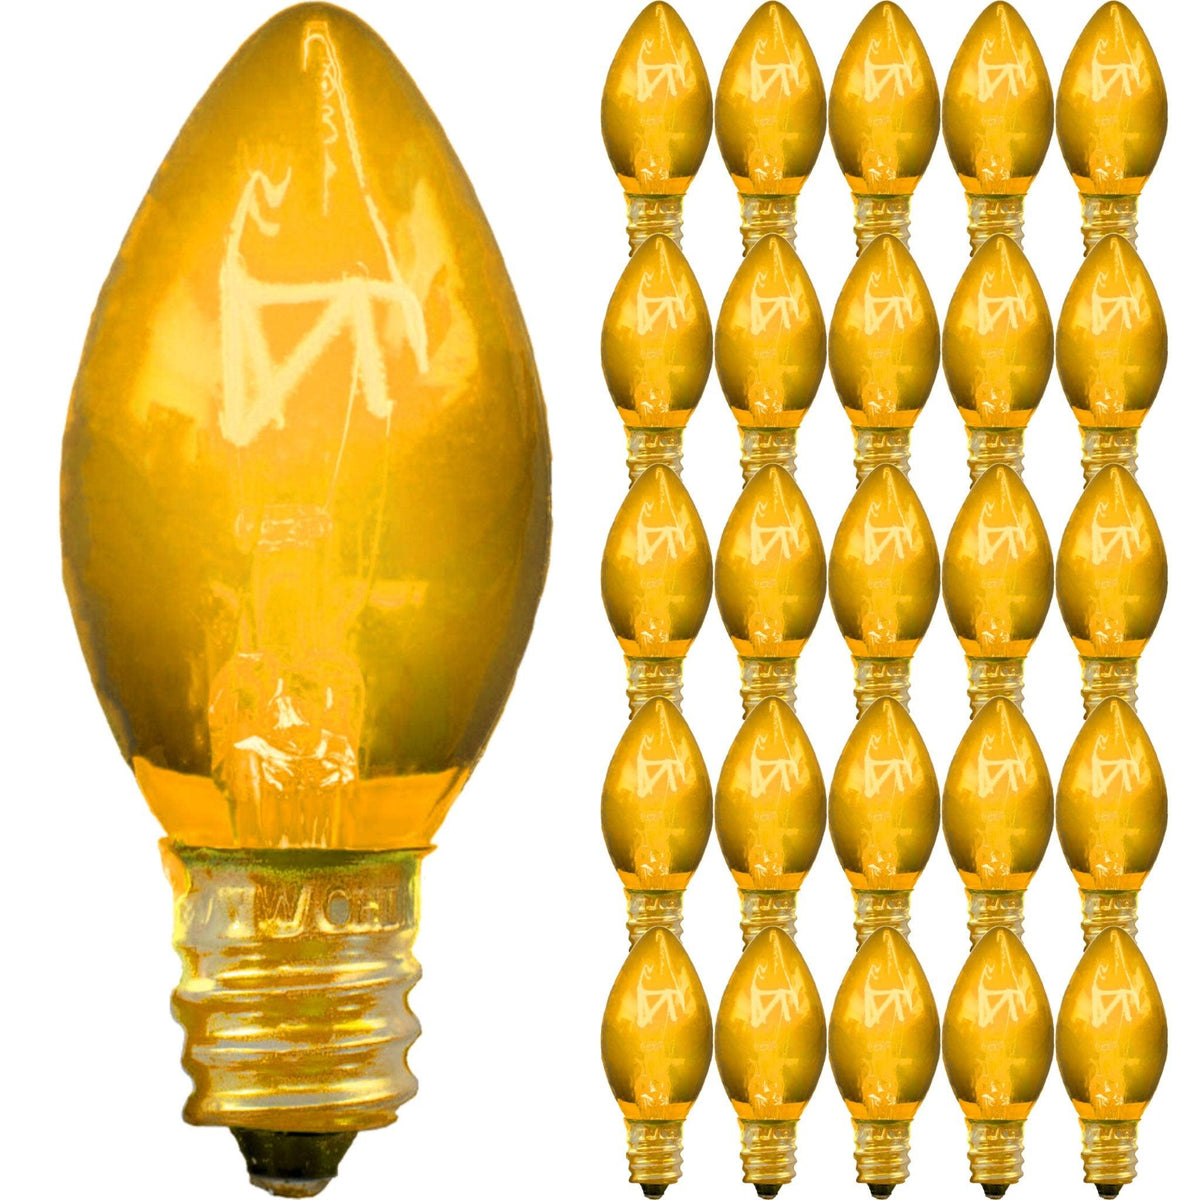 25FT C7/C9 Candelabra Style Gold Outdoor Magnetic String Lighting Set with Bulbs Included. Available at leedisplay.com